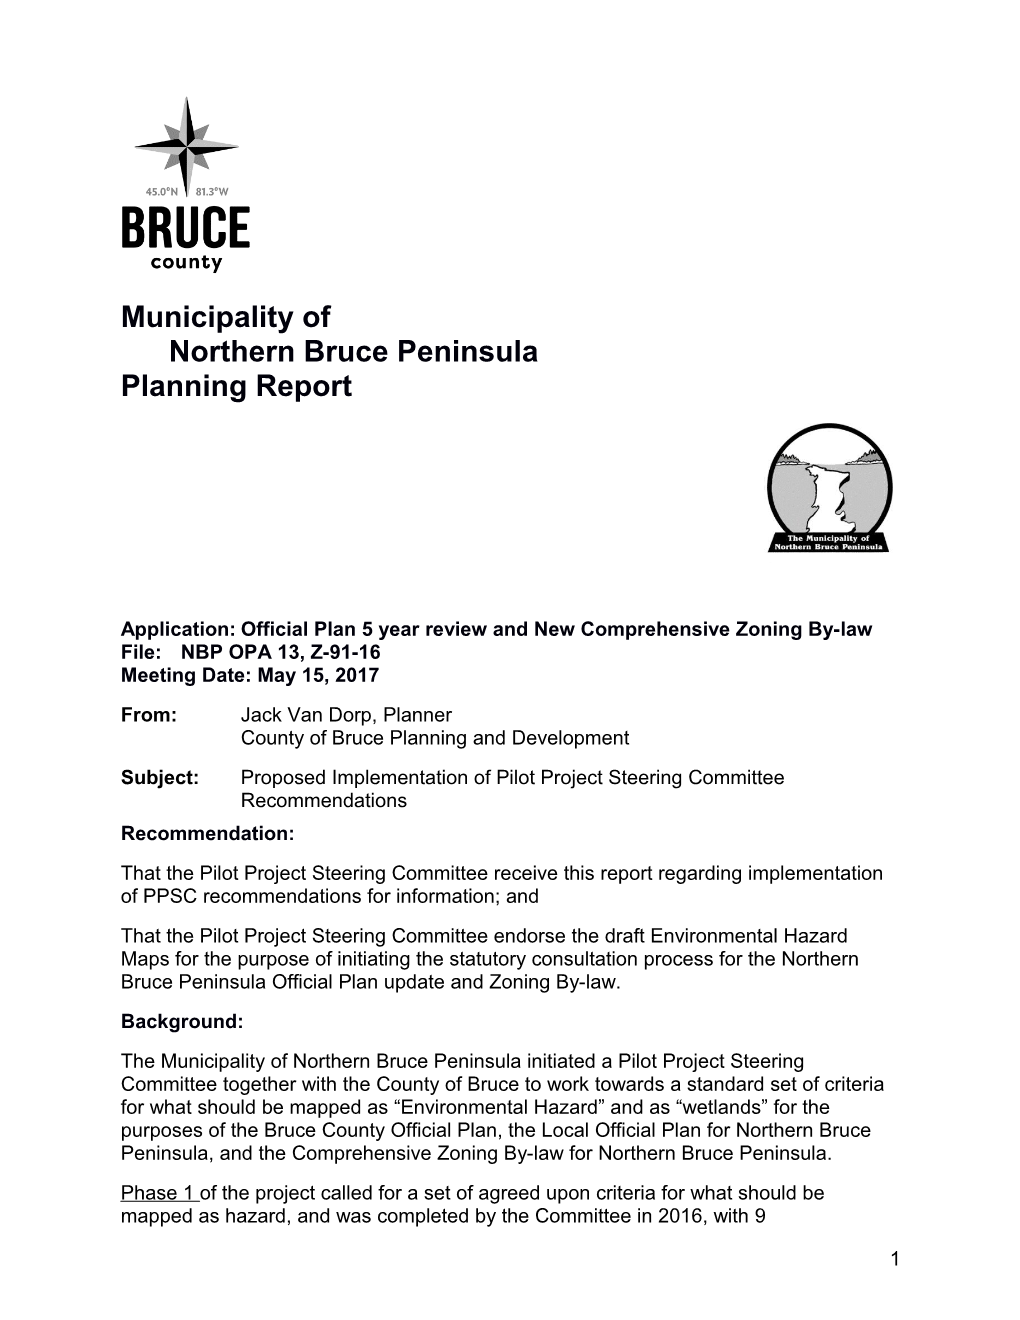 Staff Report for Northern Bruce Peninsula